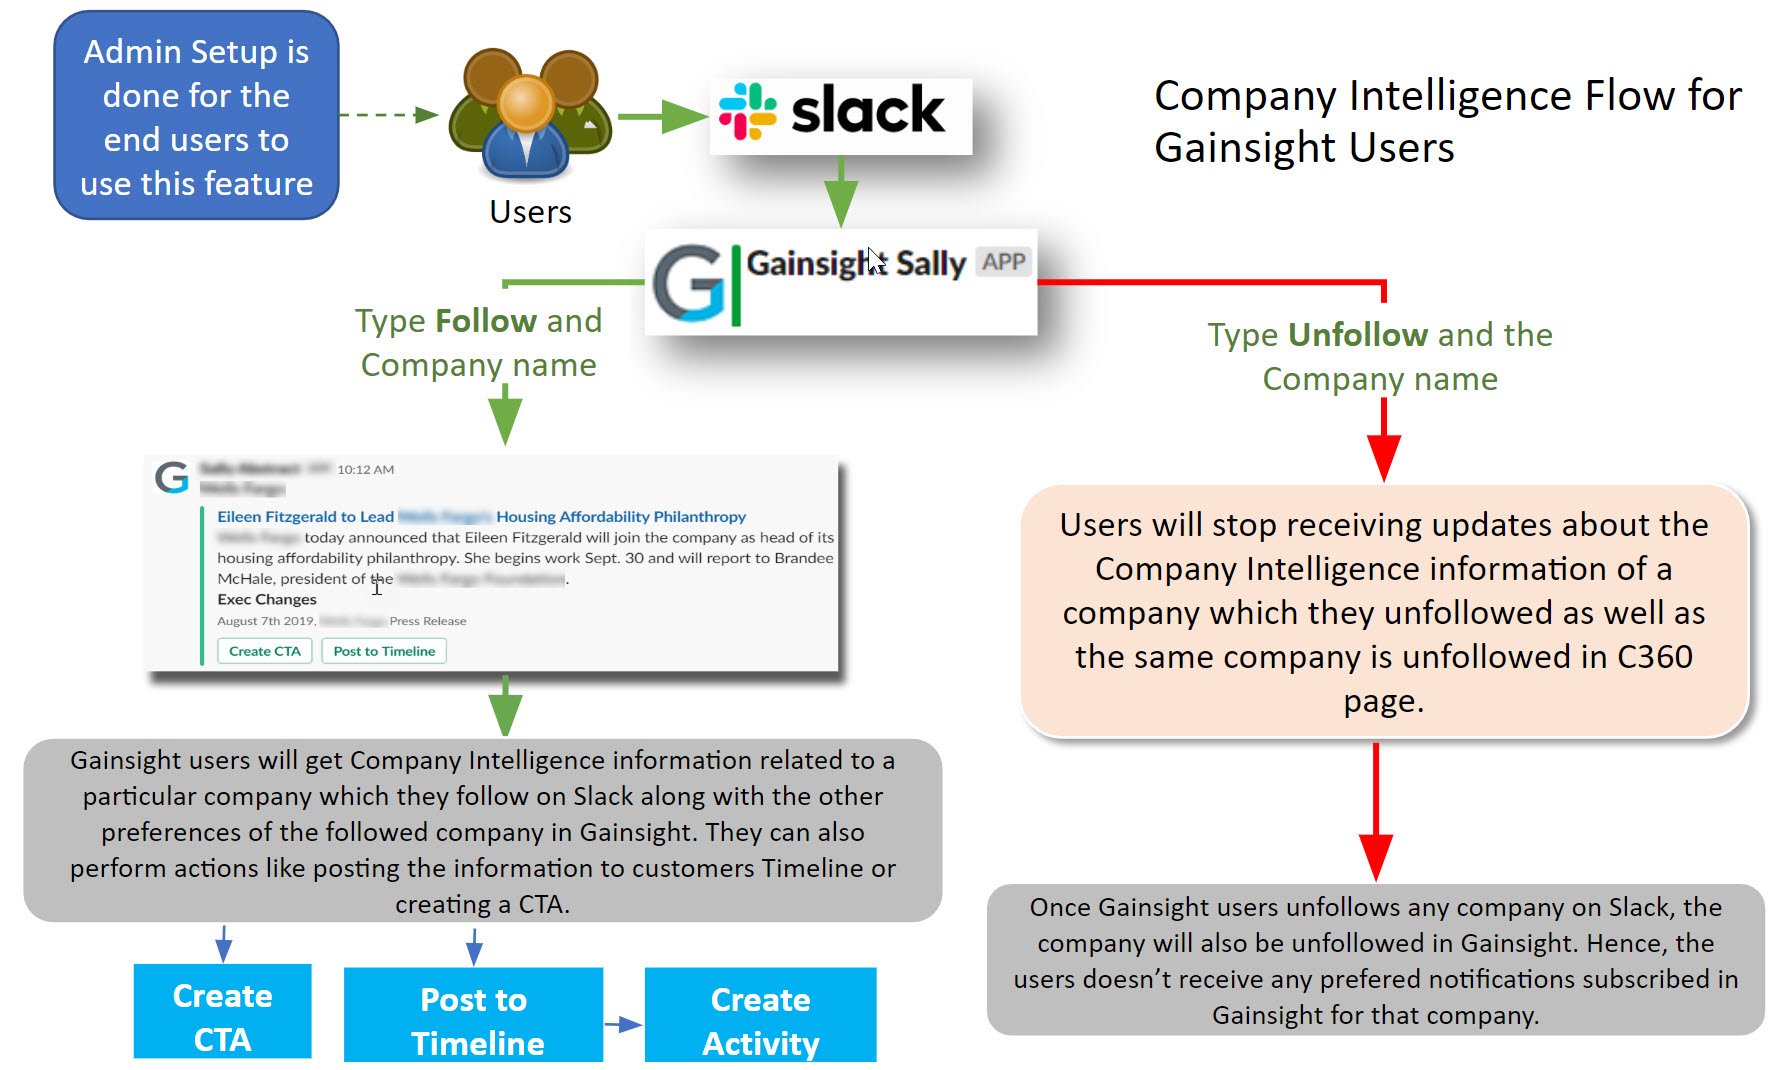 Company Intelligence Flow for Gainsight Users.jpg